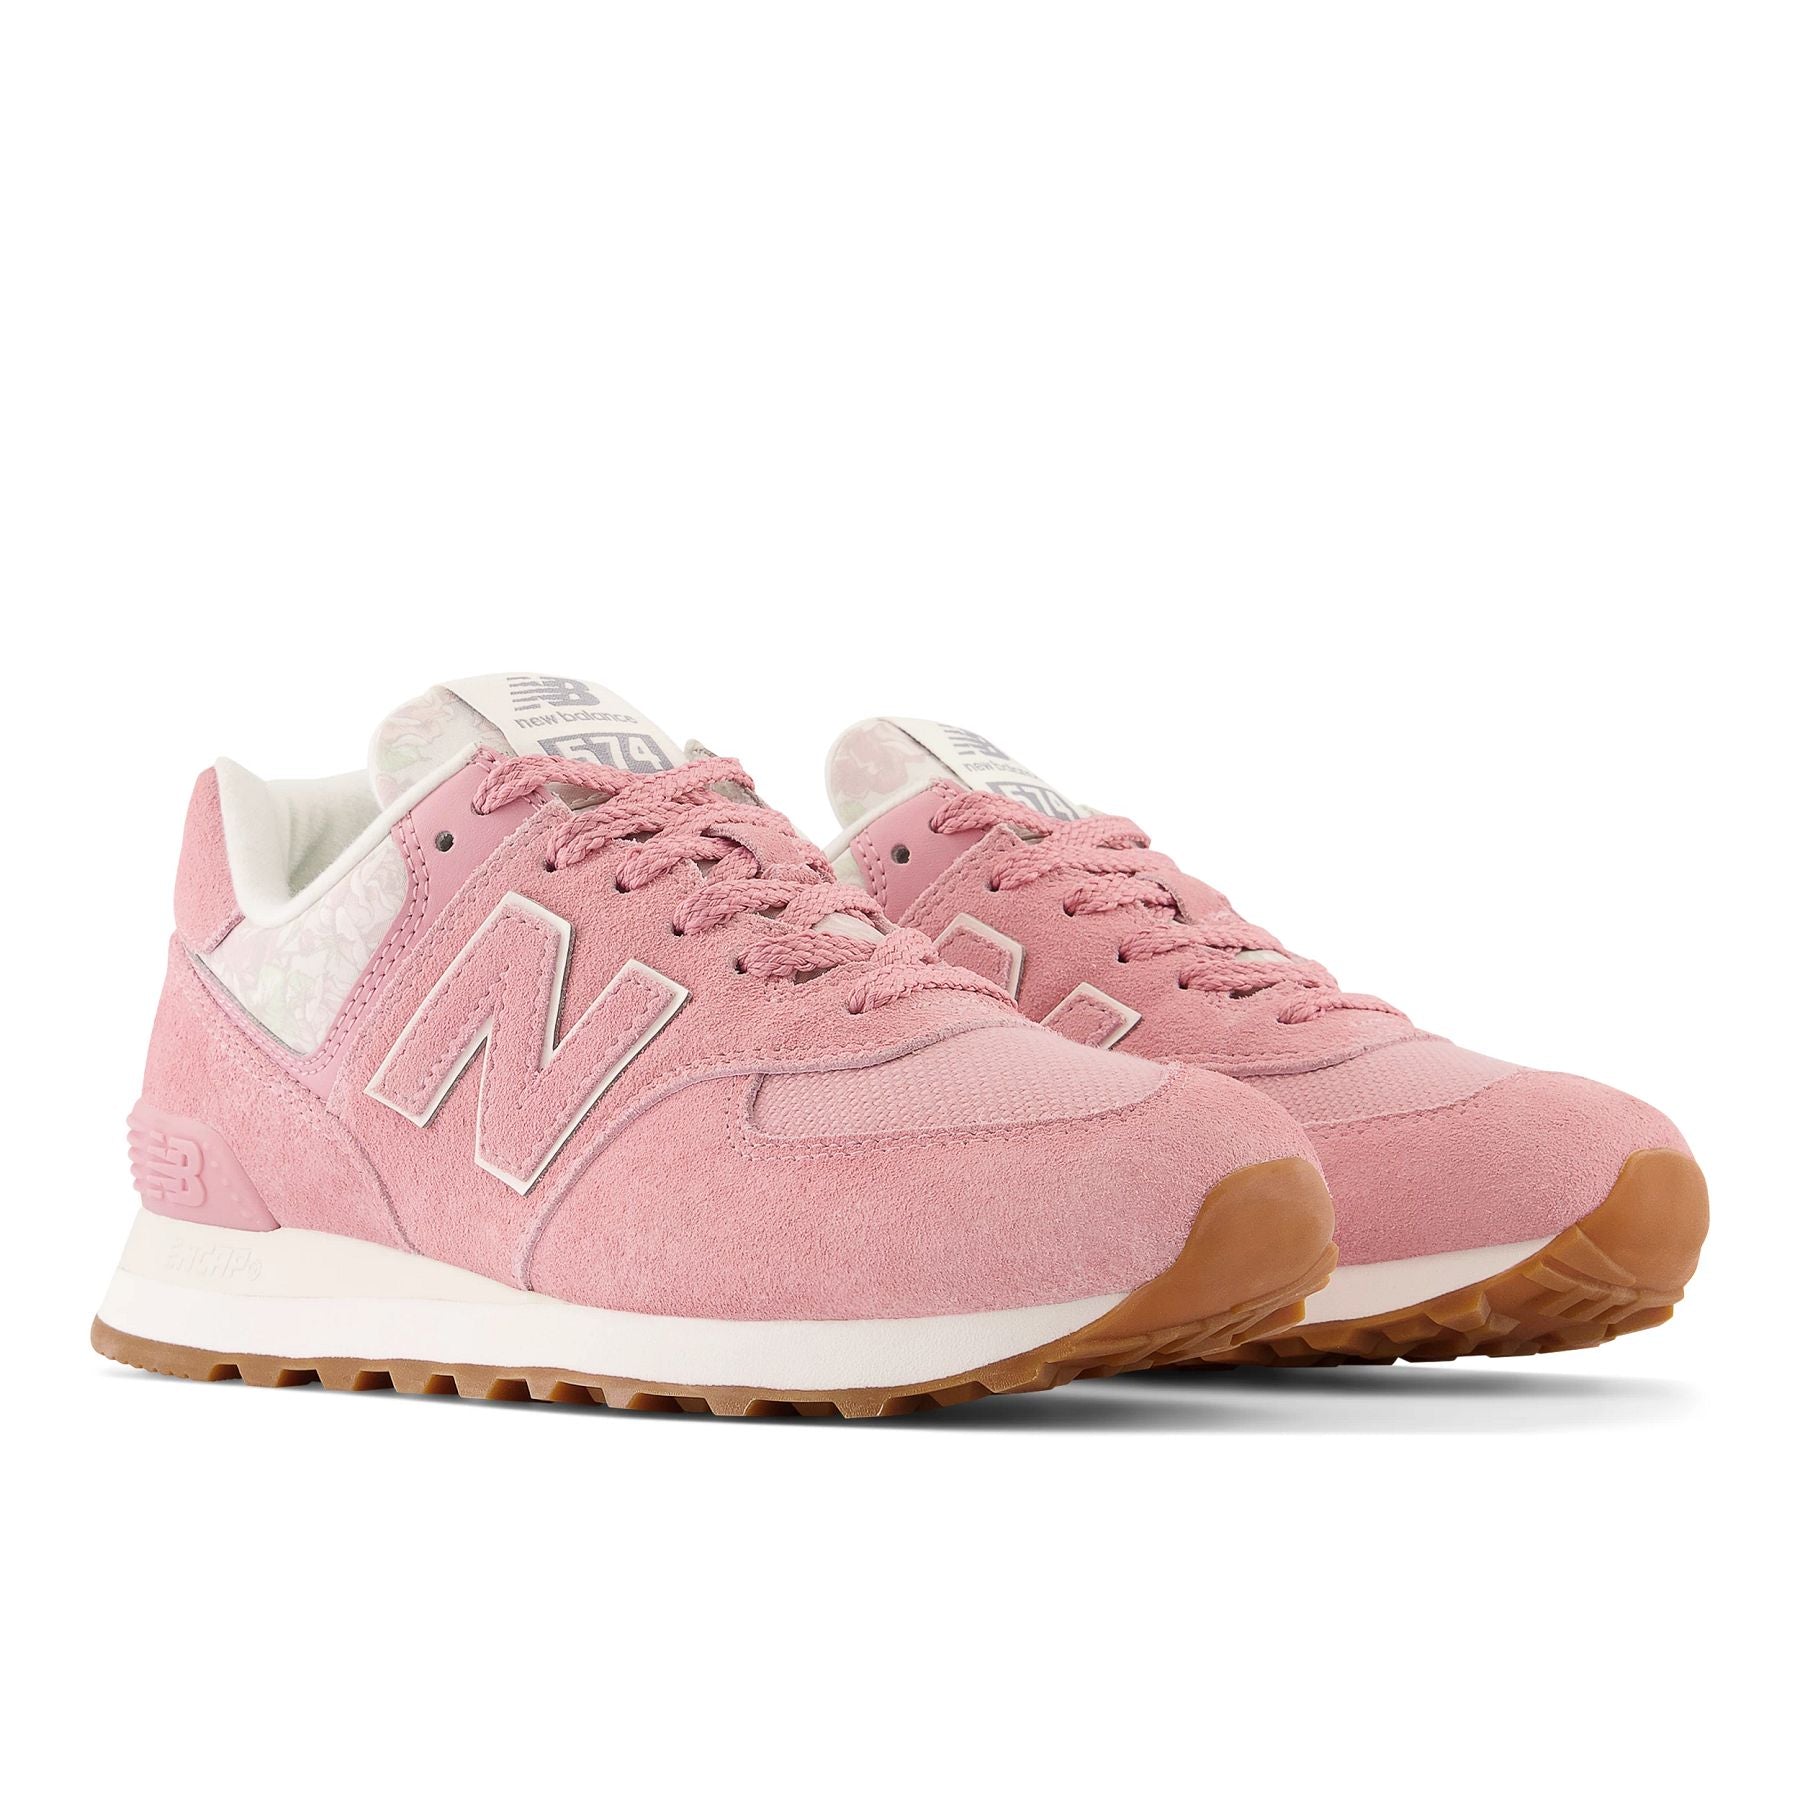 Front angle view of the Women's New Balance 574 lifestyle in the color Heavenly Rose